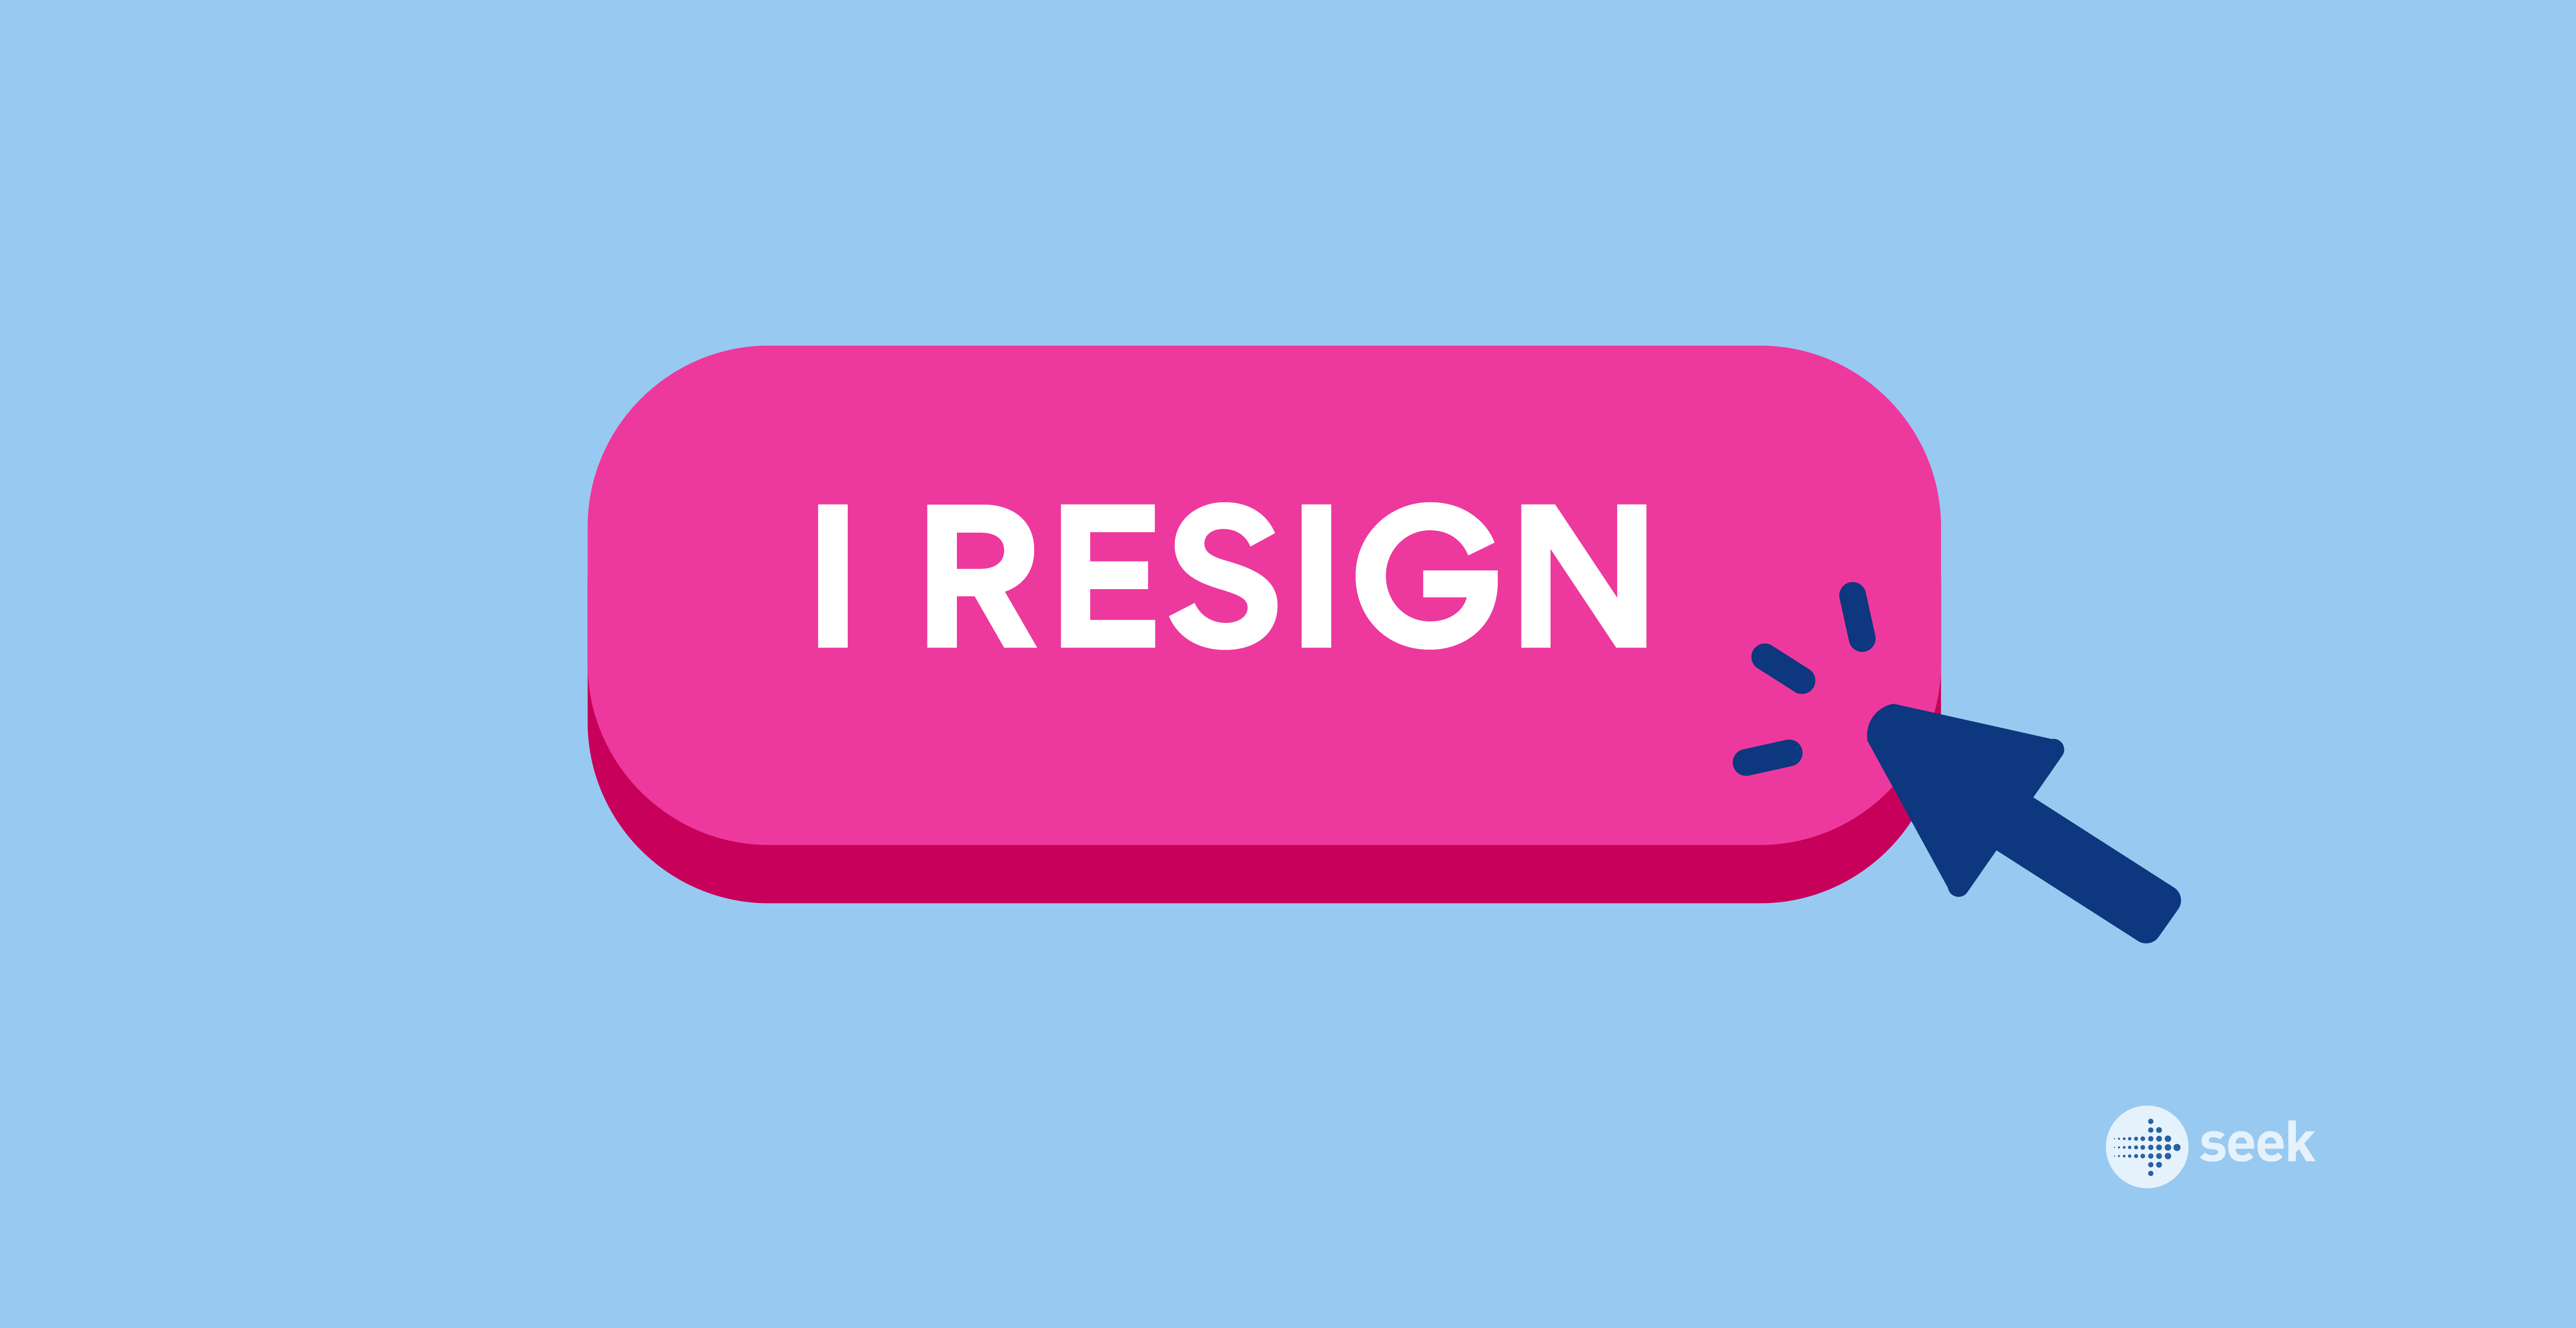 What is a resignation letter email?